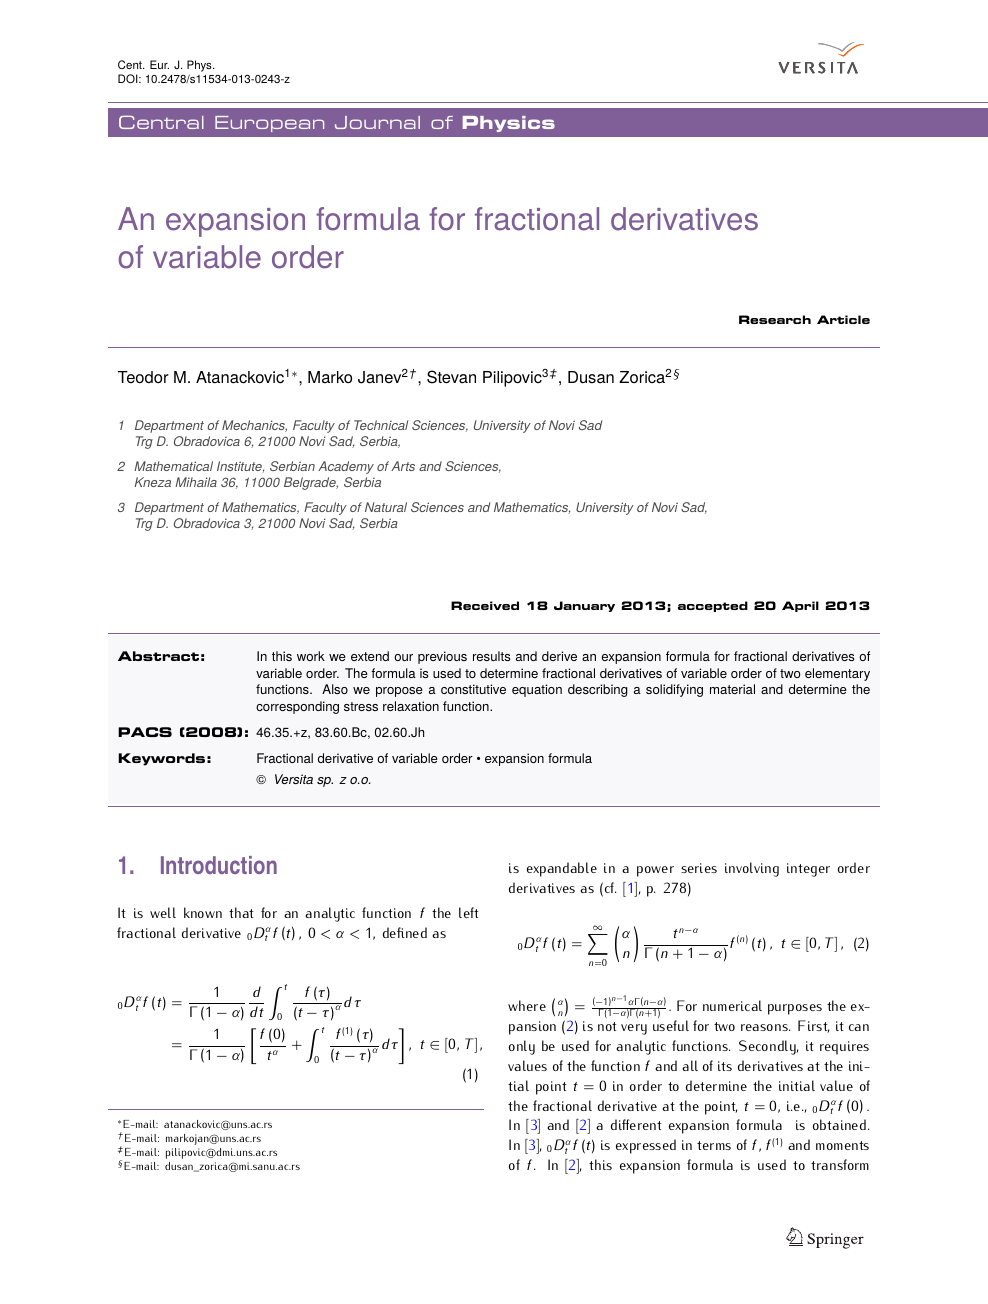 An Expansion Formula For Fractional Derivatives Of Variable Order Topic Of Research Paper In Mathematics Download Scholarly Article Pdf And Read For Free On Cyberleninka Open Science Hub